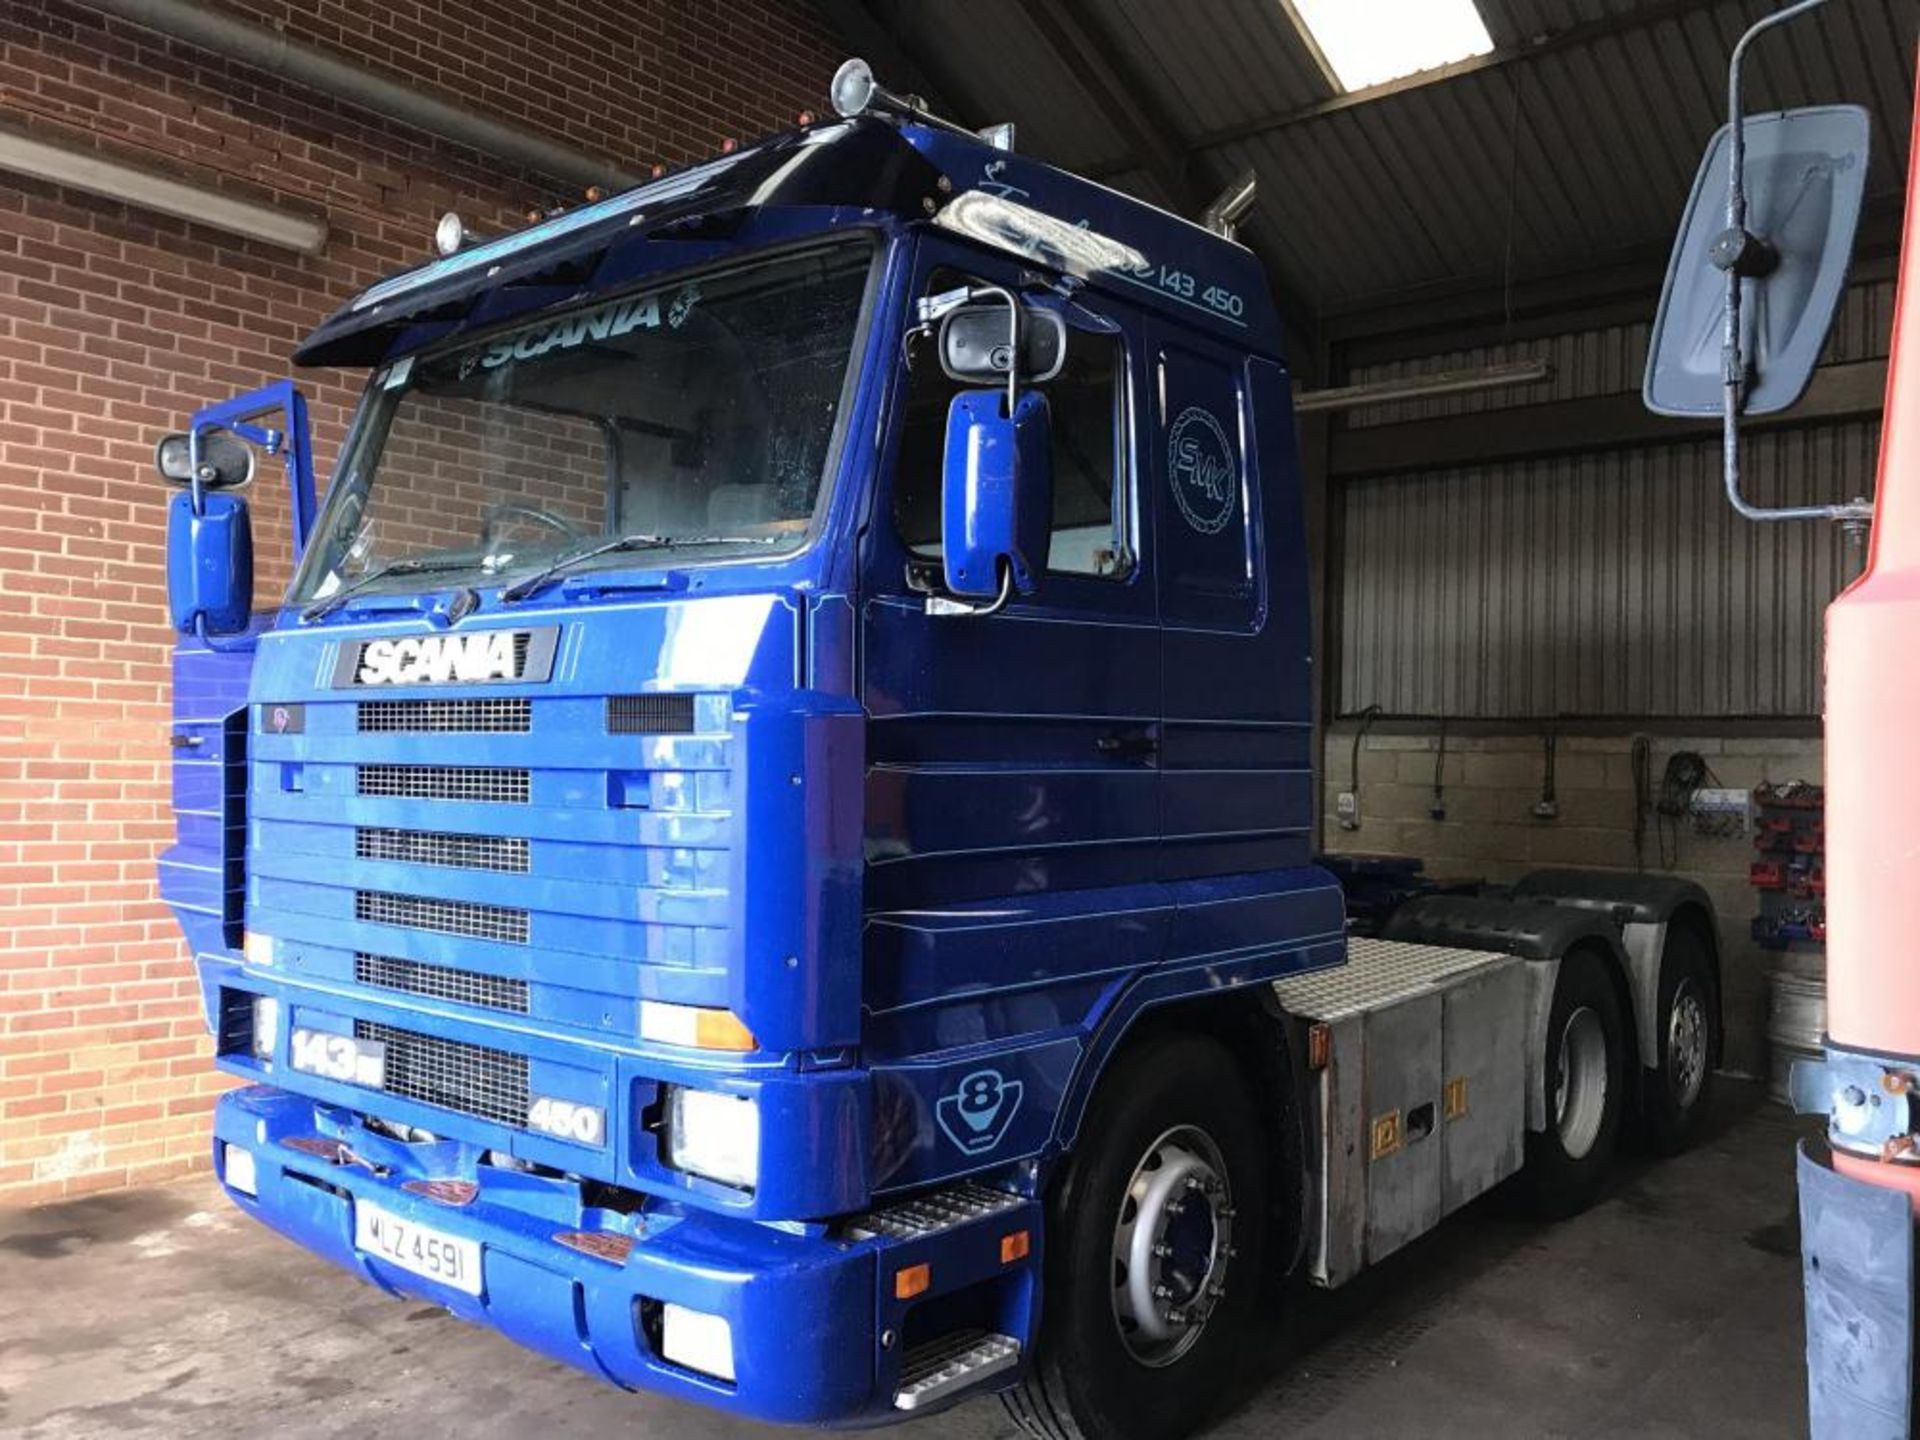 1996 SCANIA 143 450 TAG AXLE TOP LINE STREAM LINE 6X2 TRACTOR UNIT V8 GRS 900 GEARBOX GOOD RUNNER